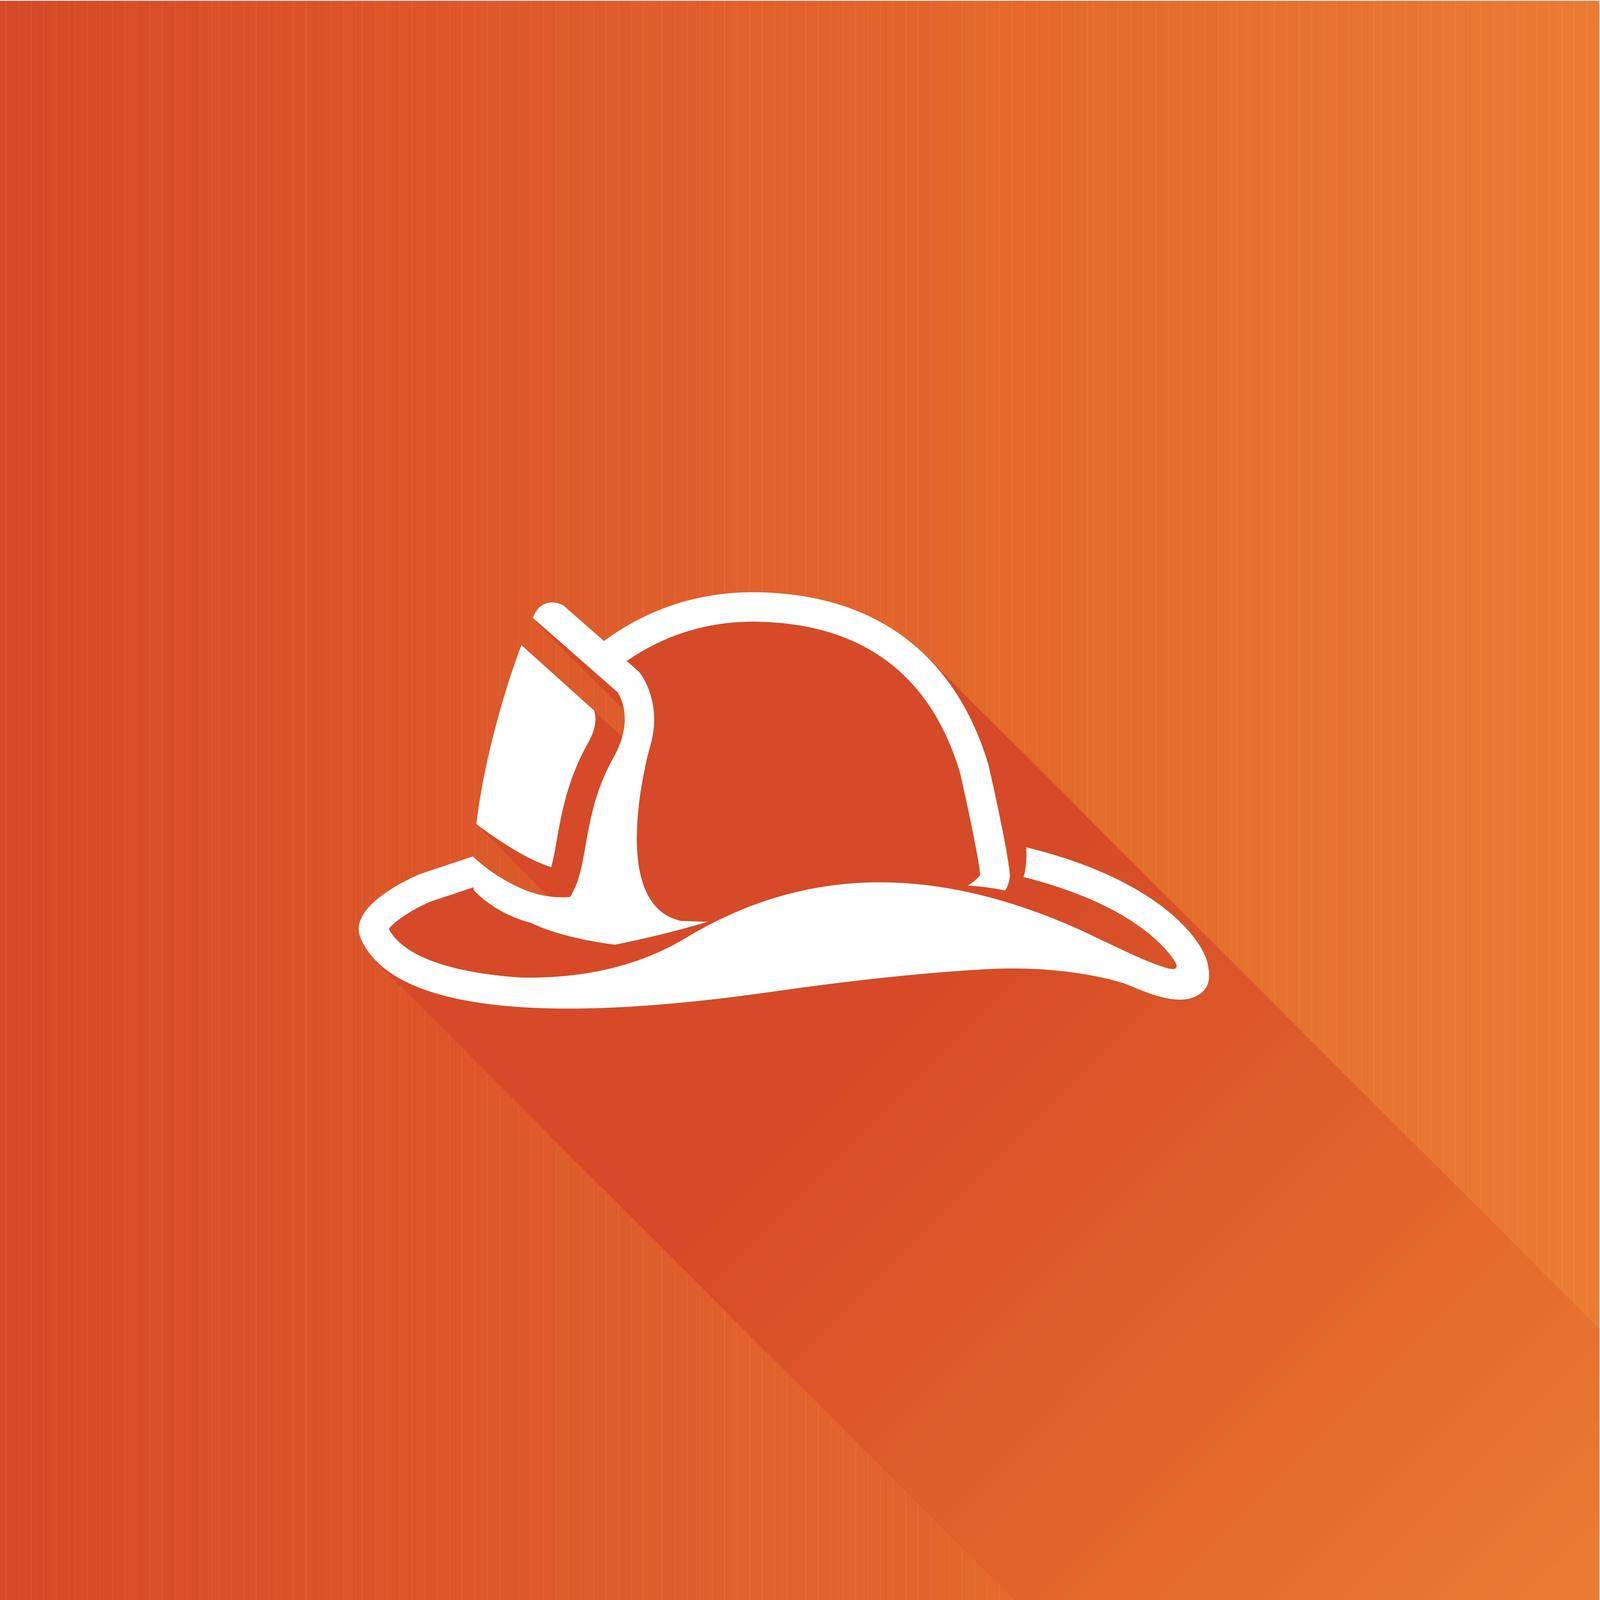 Fireman hat icon in Metro user interface color style. Helmet firefighter equipment